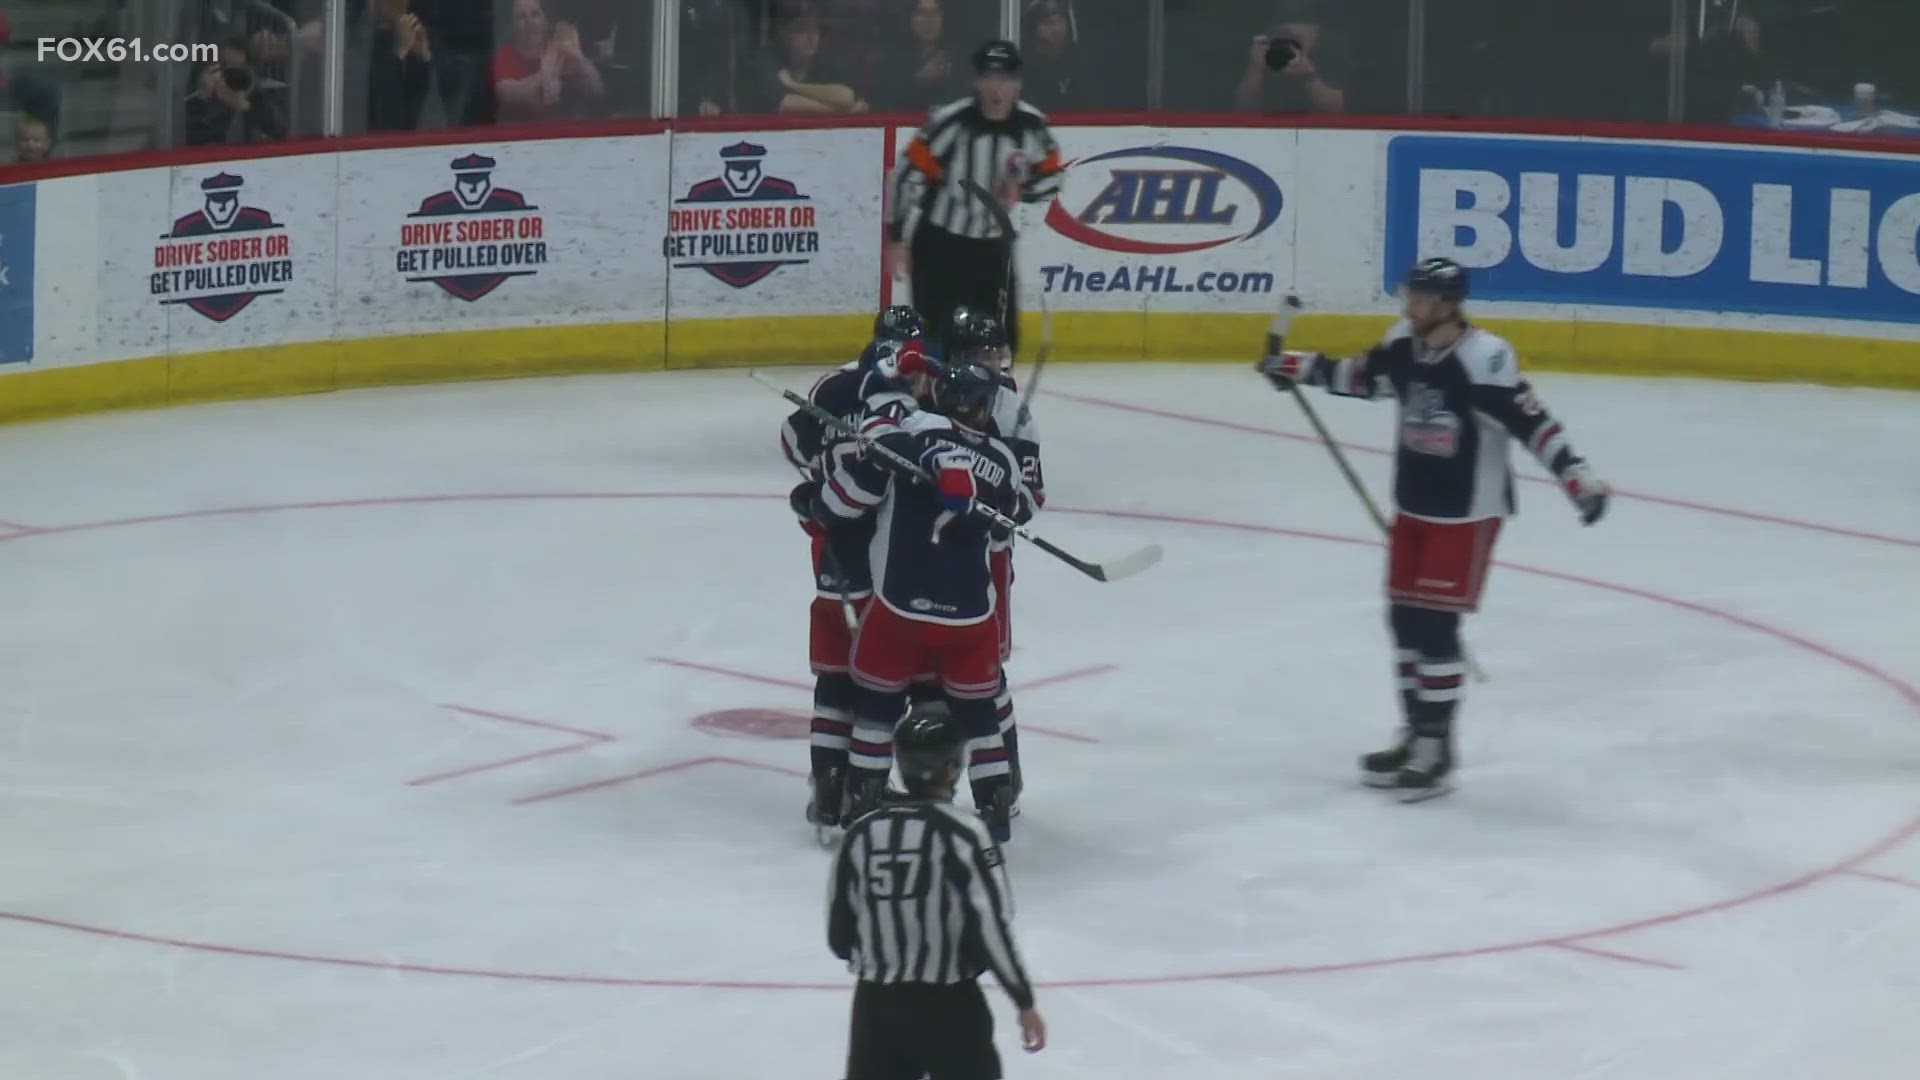 Hartford Wolf Pack advance to Division Finals over Bruins fox61